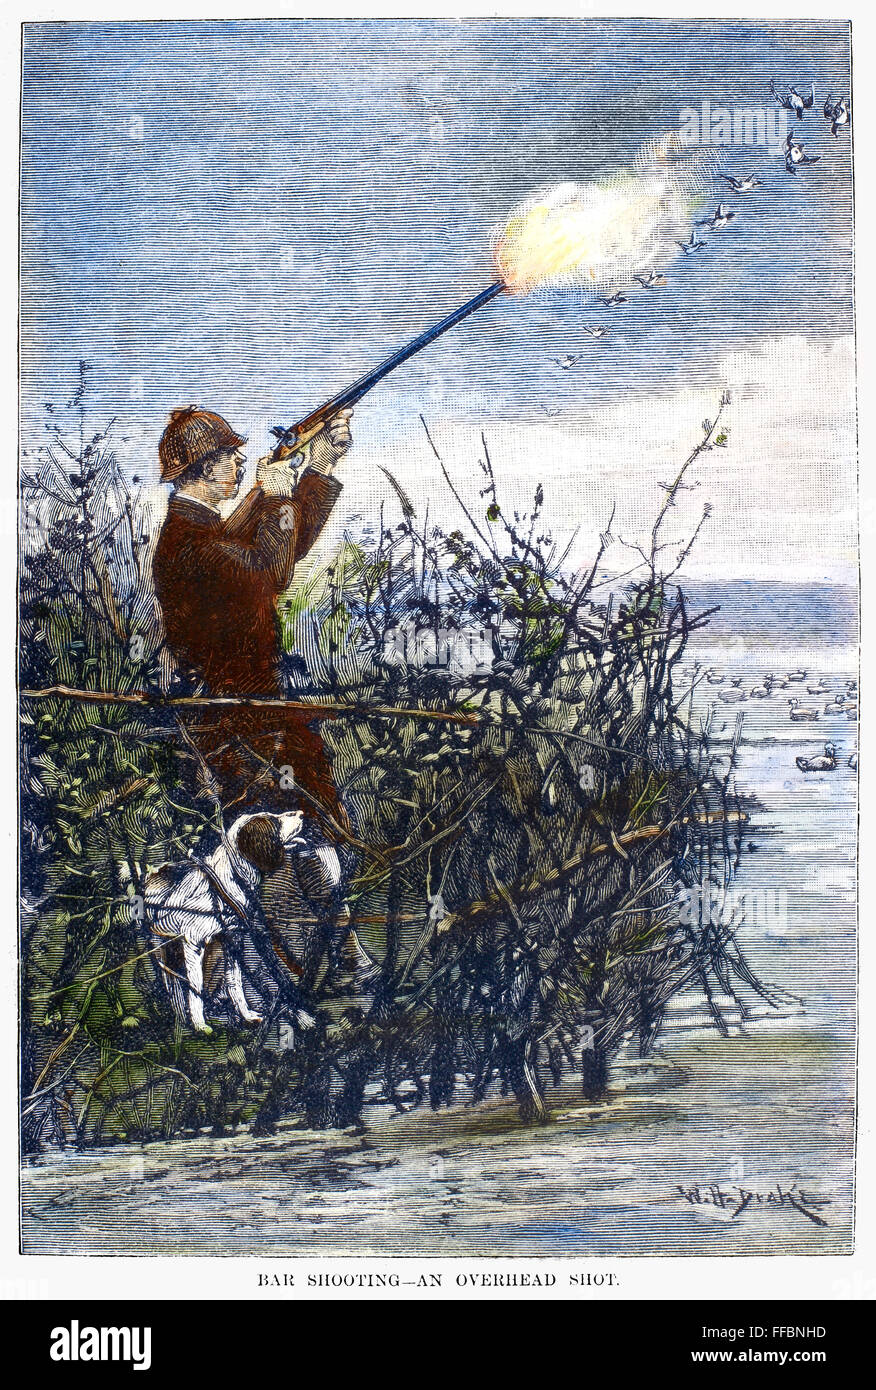 DUCK HUNTING, 1888. /nShooting canvas-back ducks on the Chesapeake Bay. Line engraving, American, 1888. Stock Photo